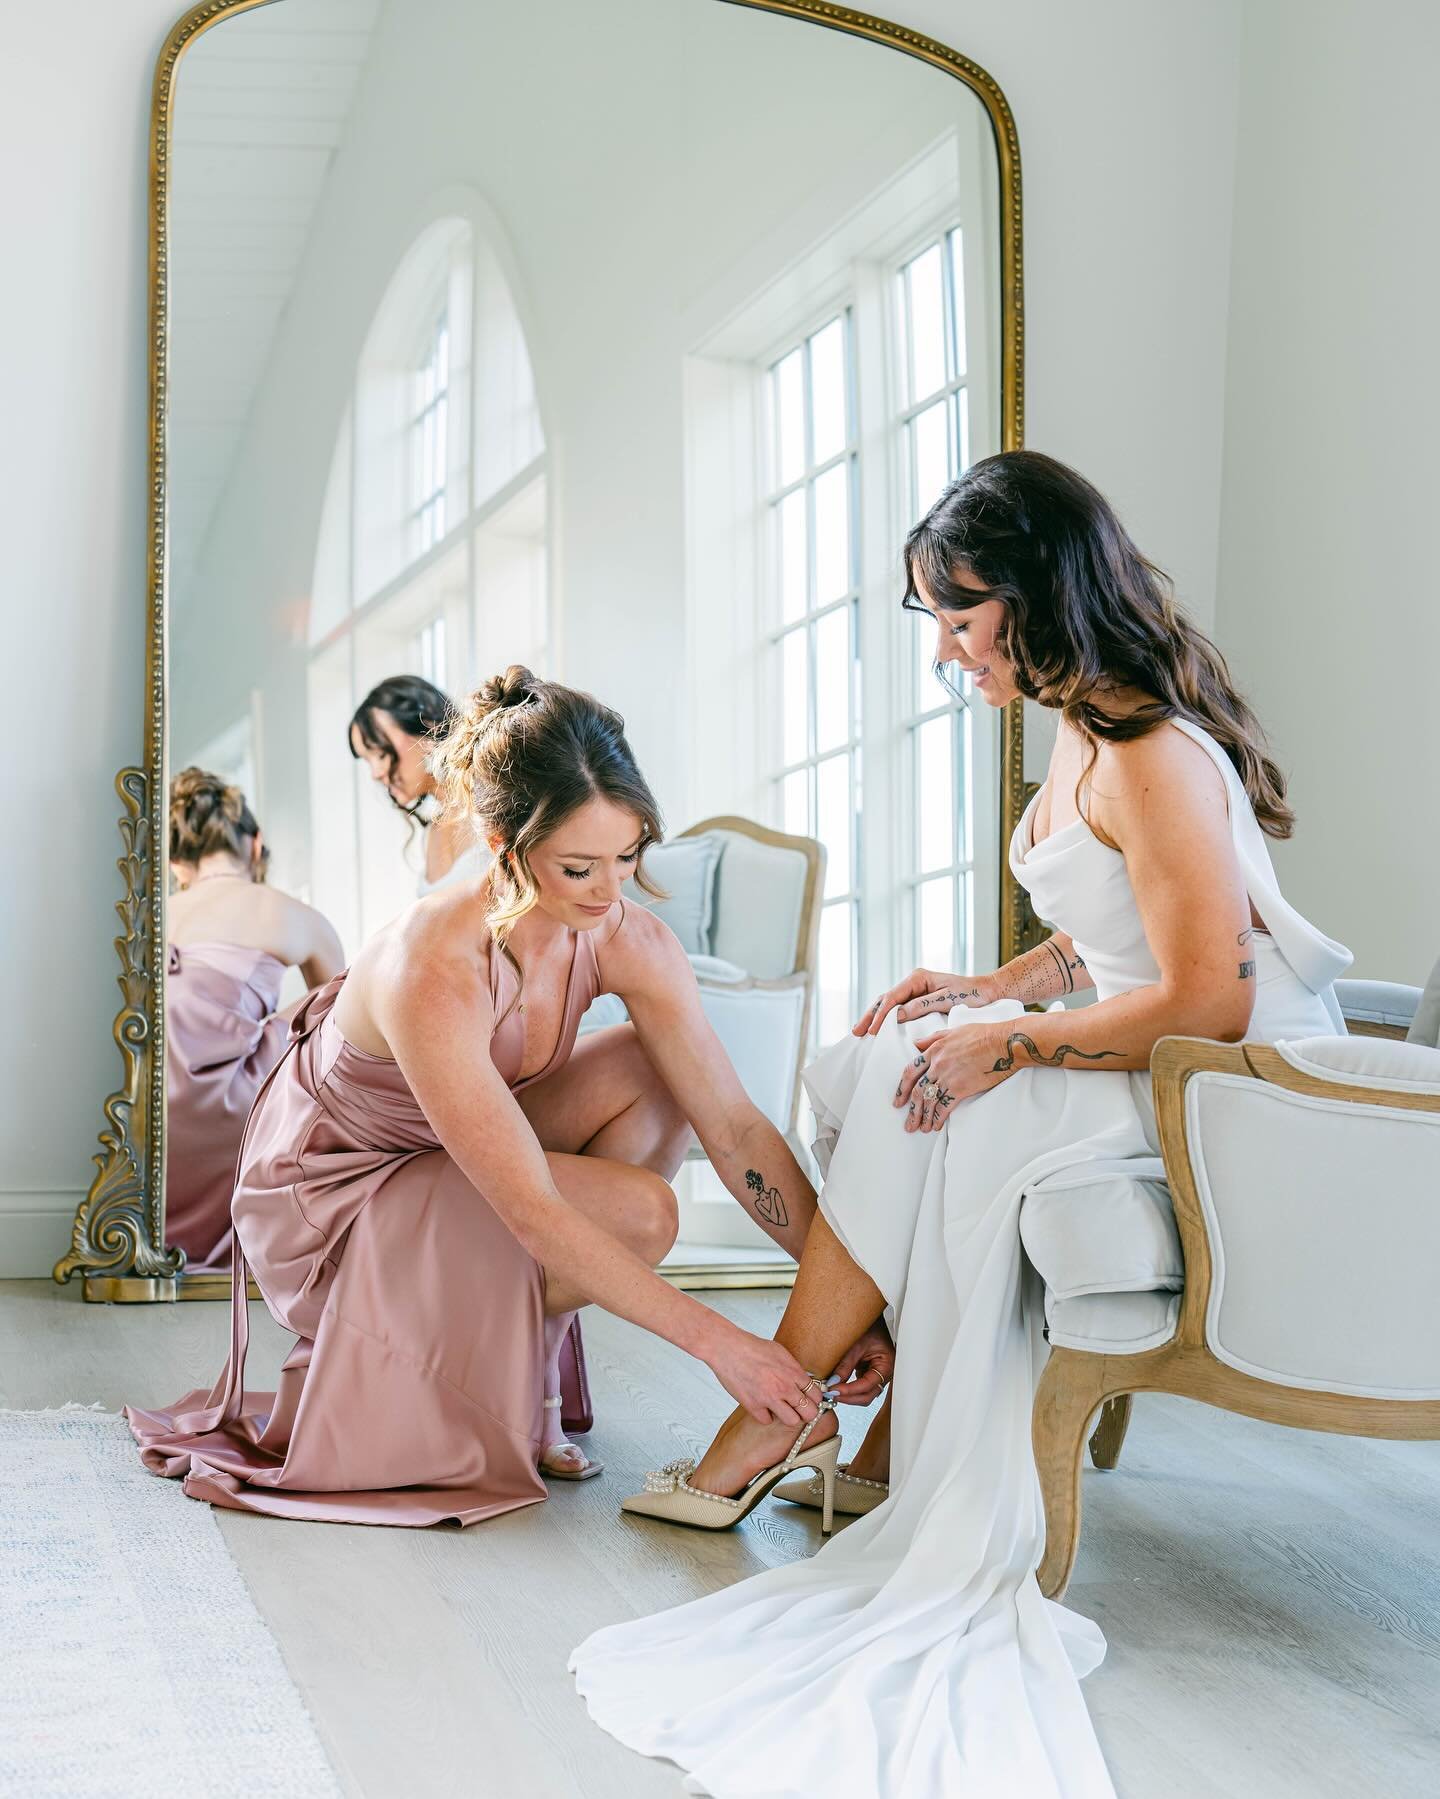 The Bridal Suite&mdash;crafted for those intimate moments shared between a bride and her maid of honor. ✨

Venue: @westwind_hills 
Photographer: @mitchellbennettphotography 

#stlouiswedding #missouriweddings #missouribrides #stlouisweddingvenues #mi